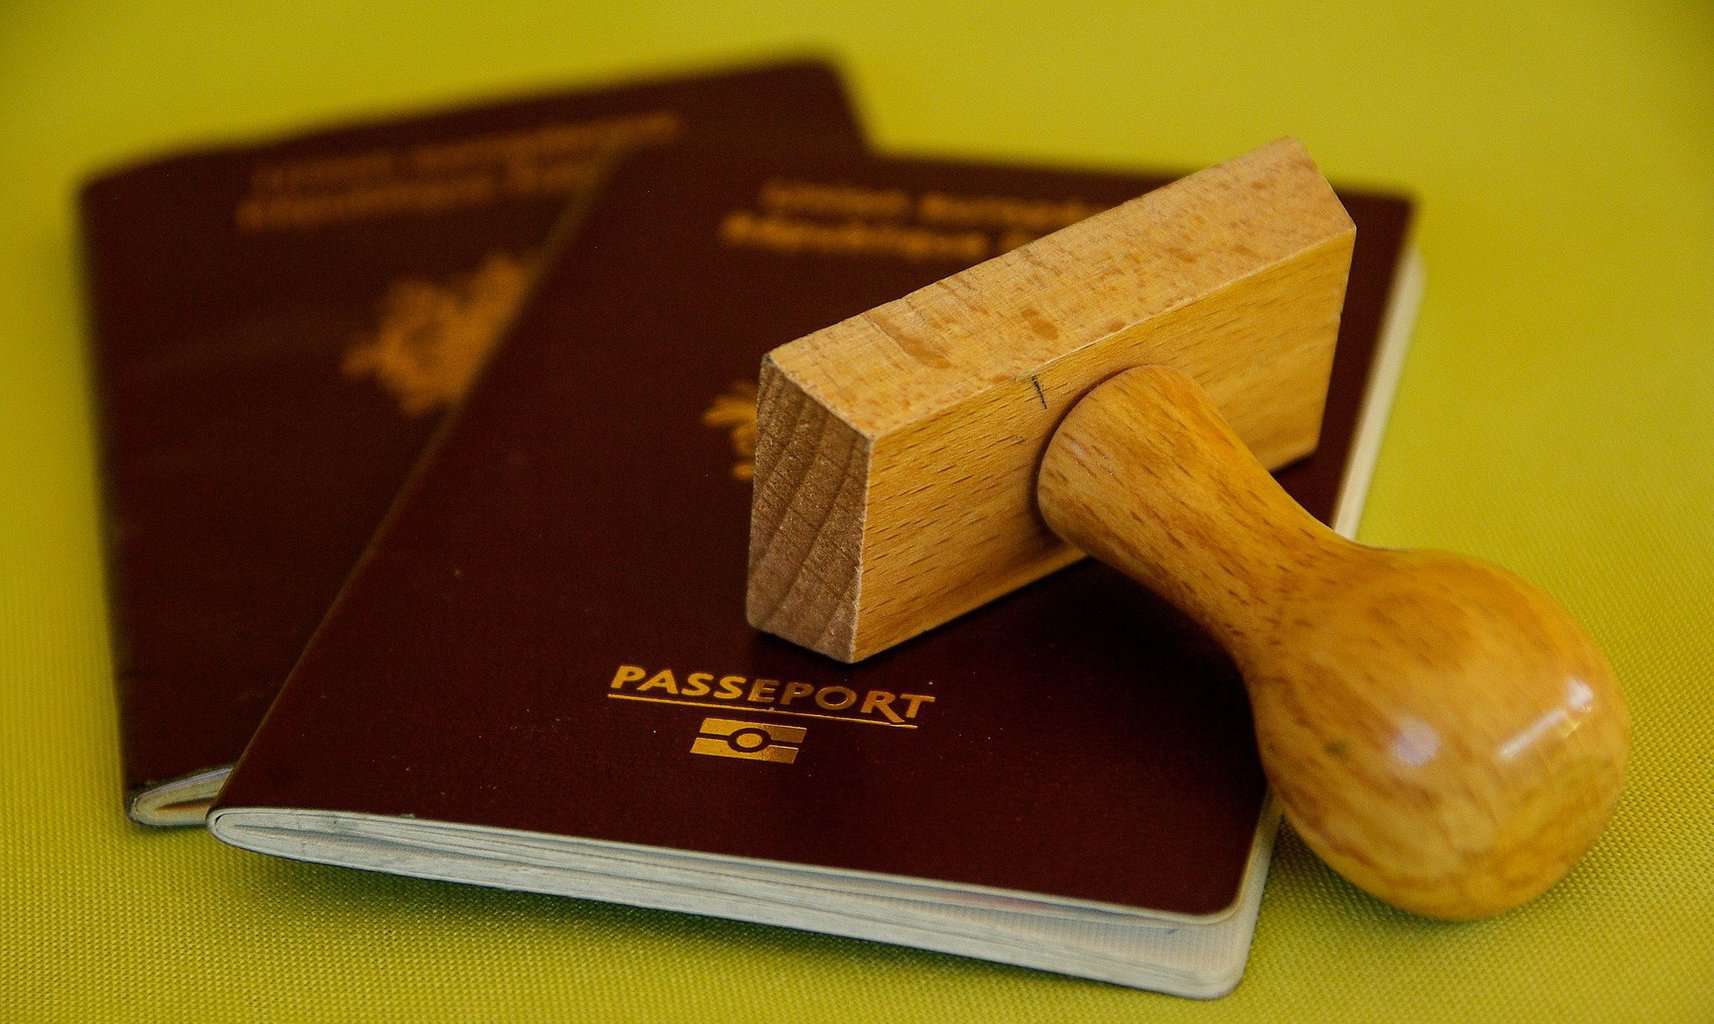 What is a Passport/Travel Document Number?